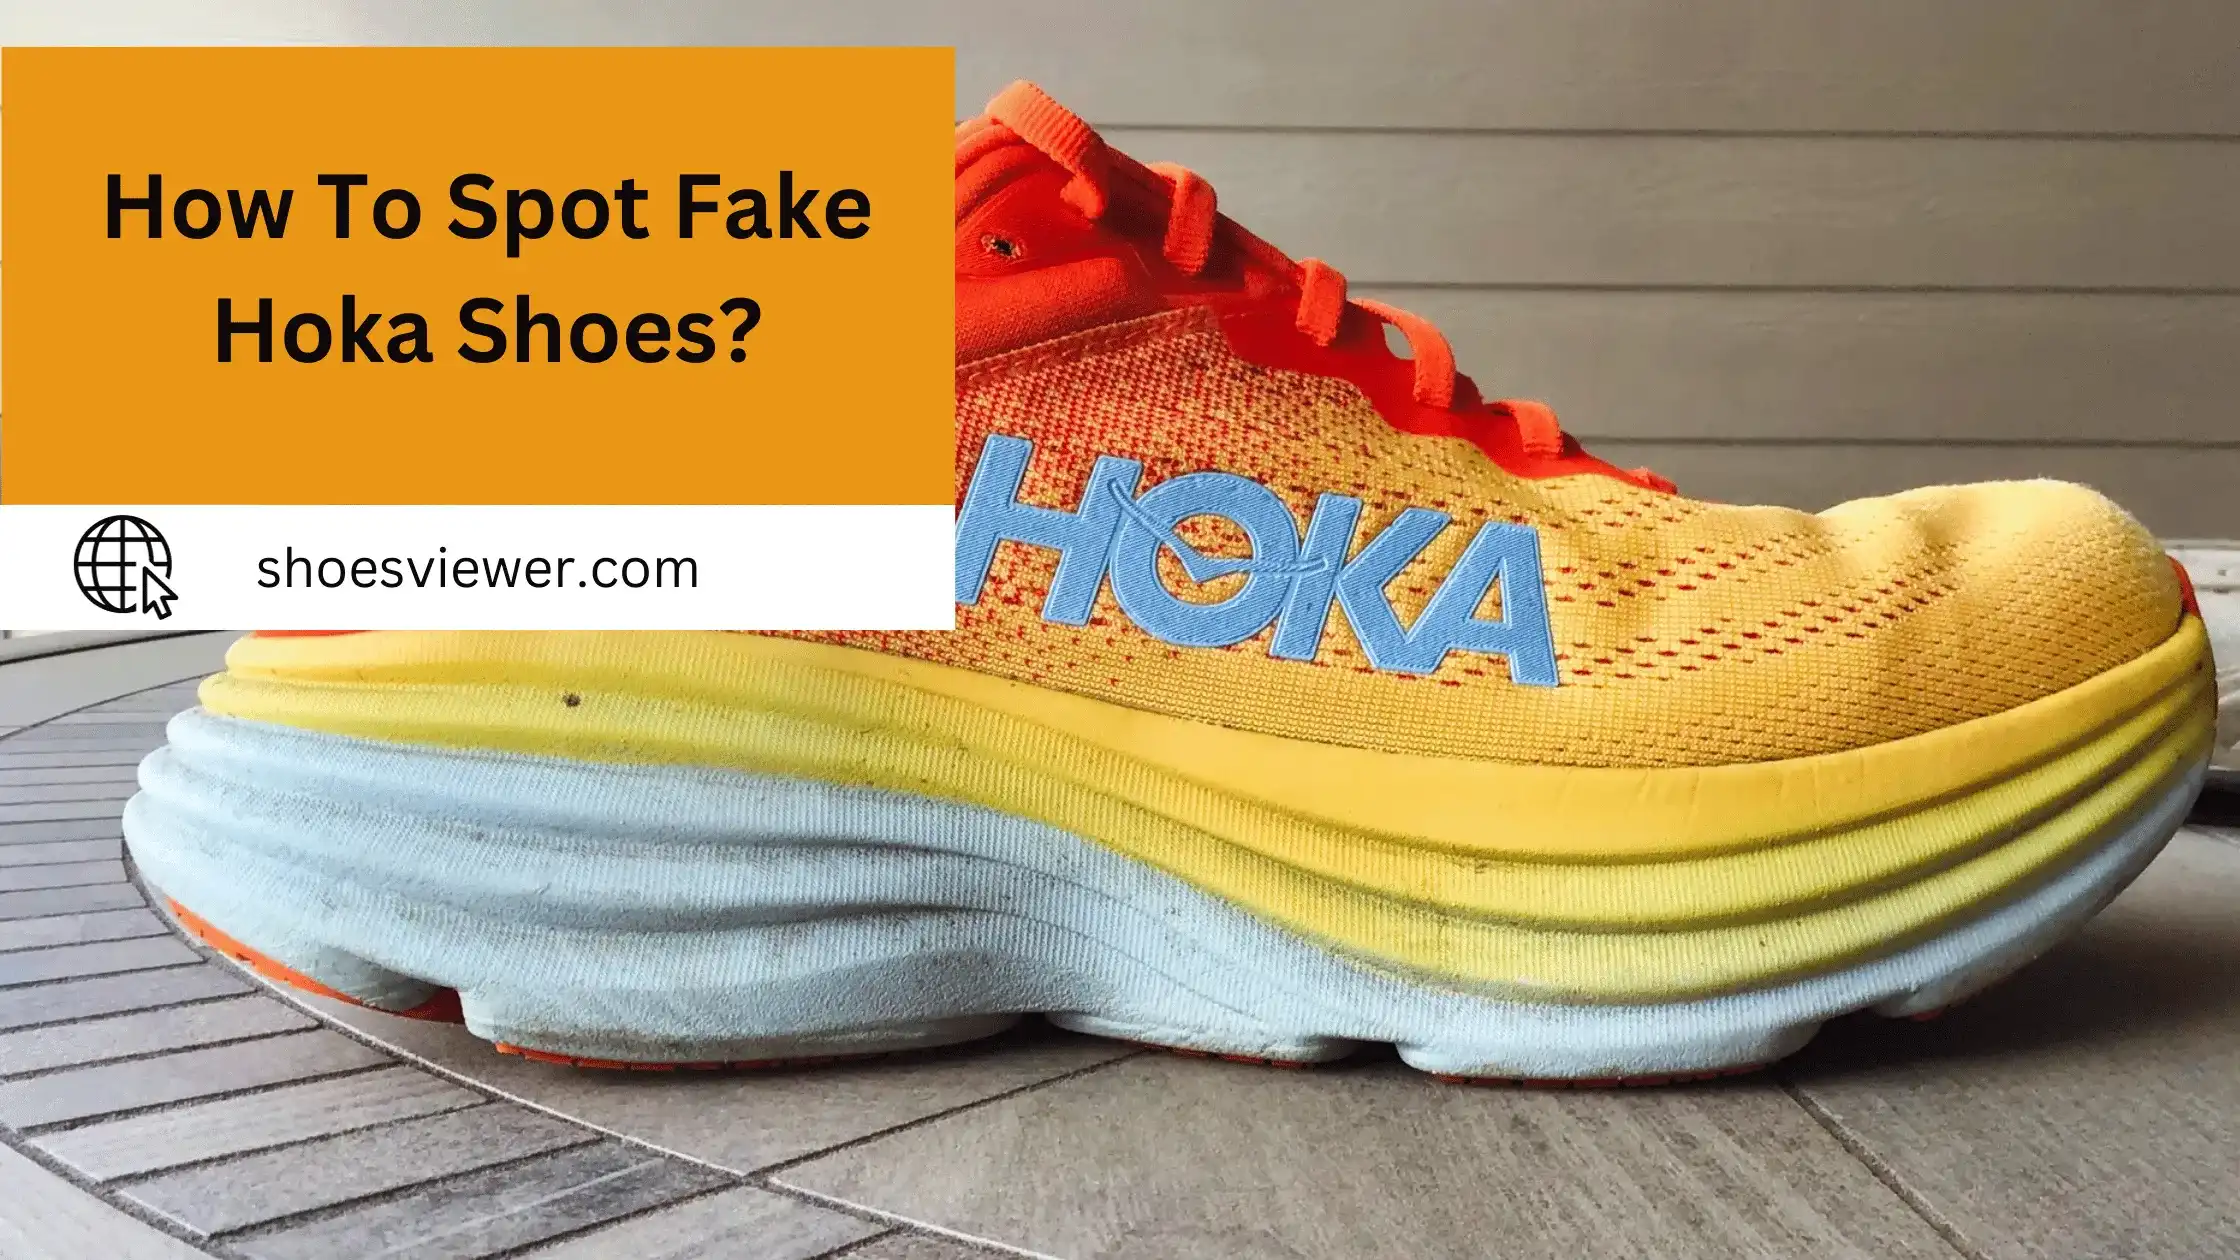 How To Spot Fake Hoka Shoes? (An In-Depth Guide)